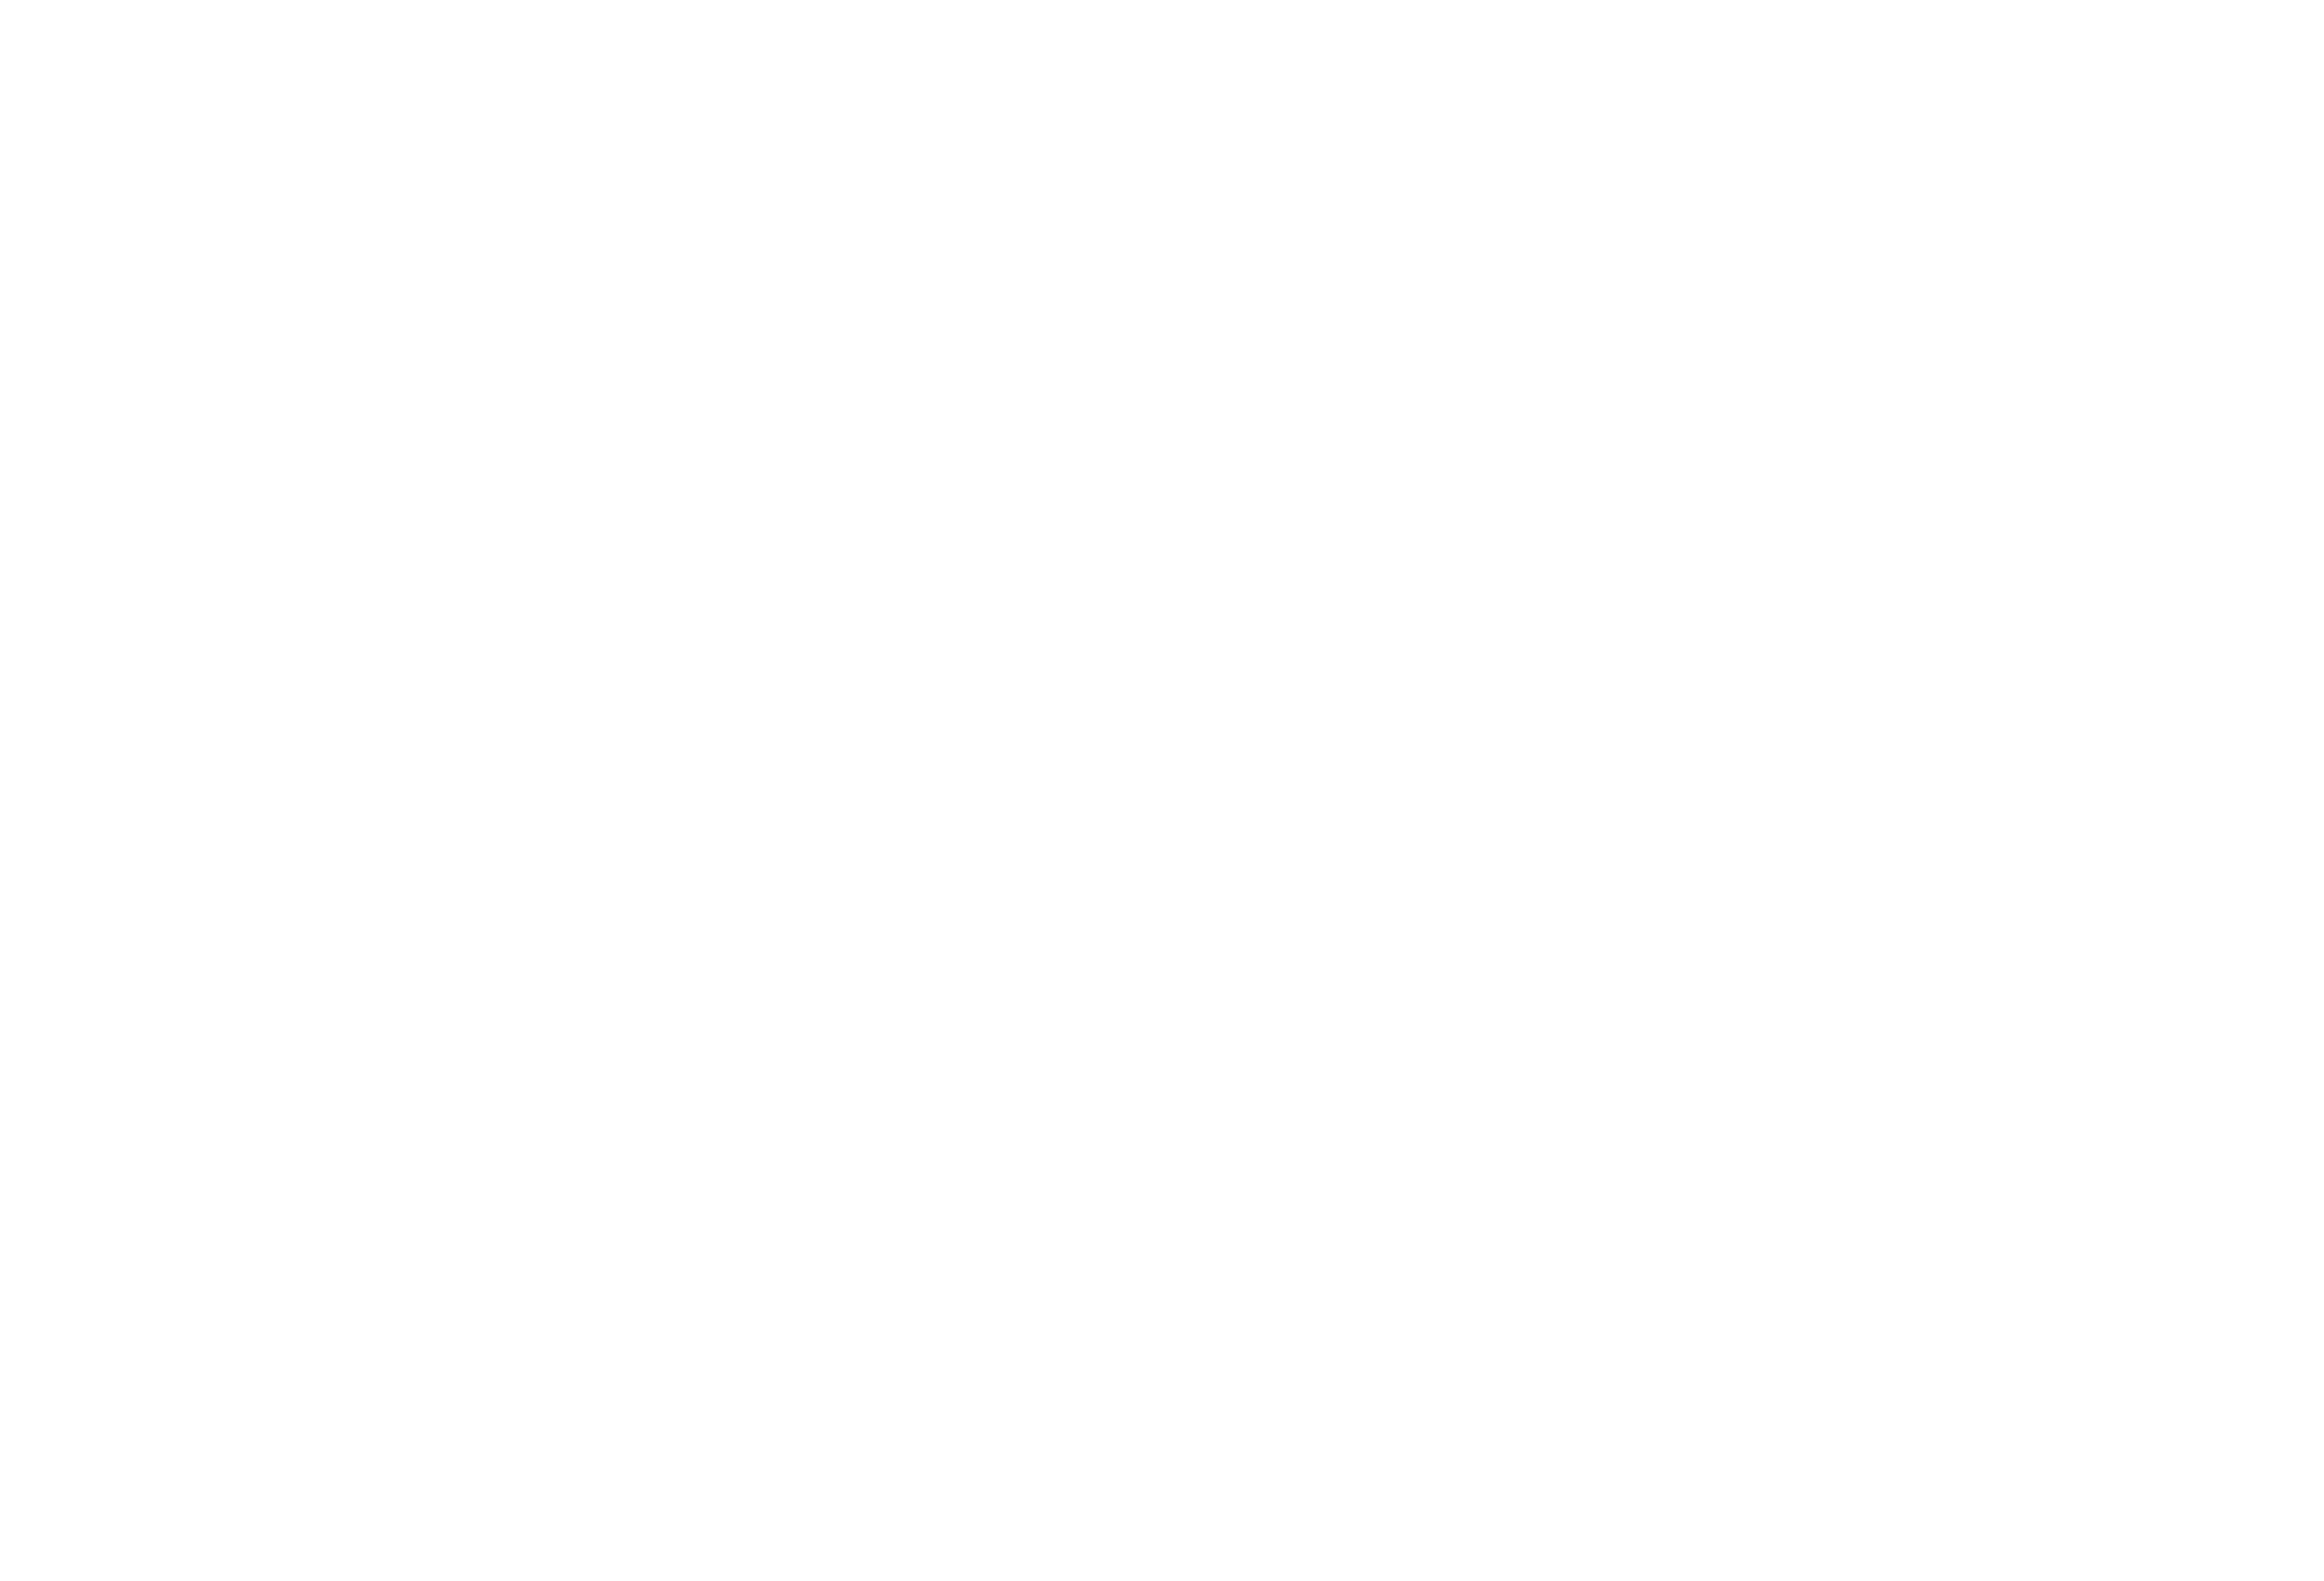 America's Cup - WHITE.png